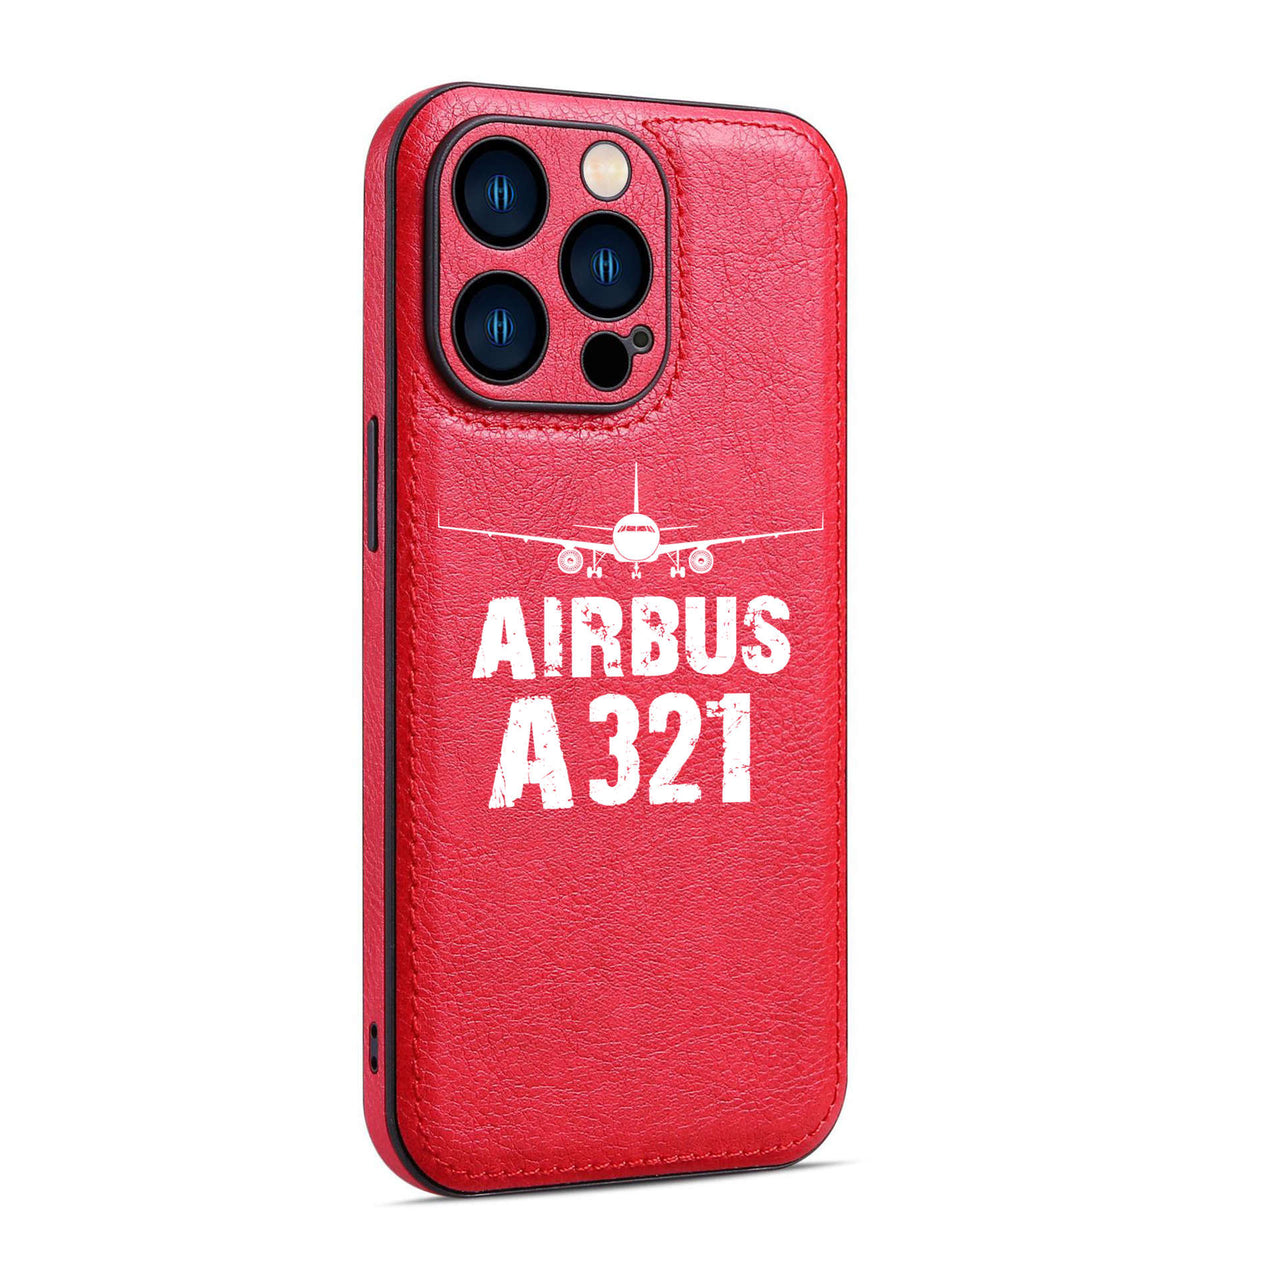 Airbus A321 & Plane Designed Leather iPhone Cases